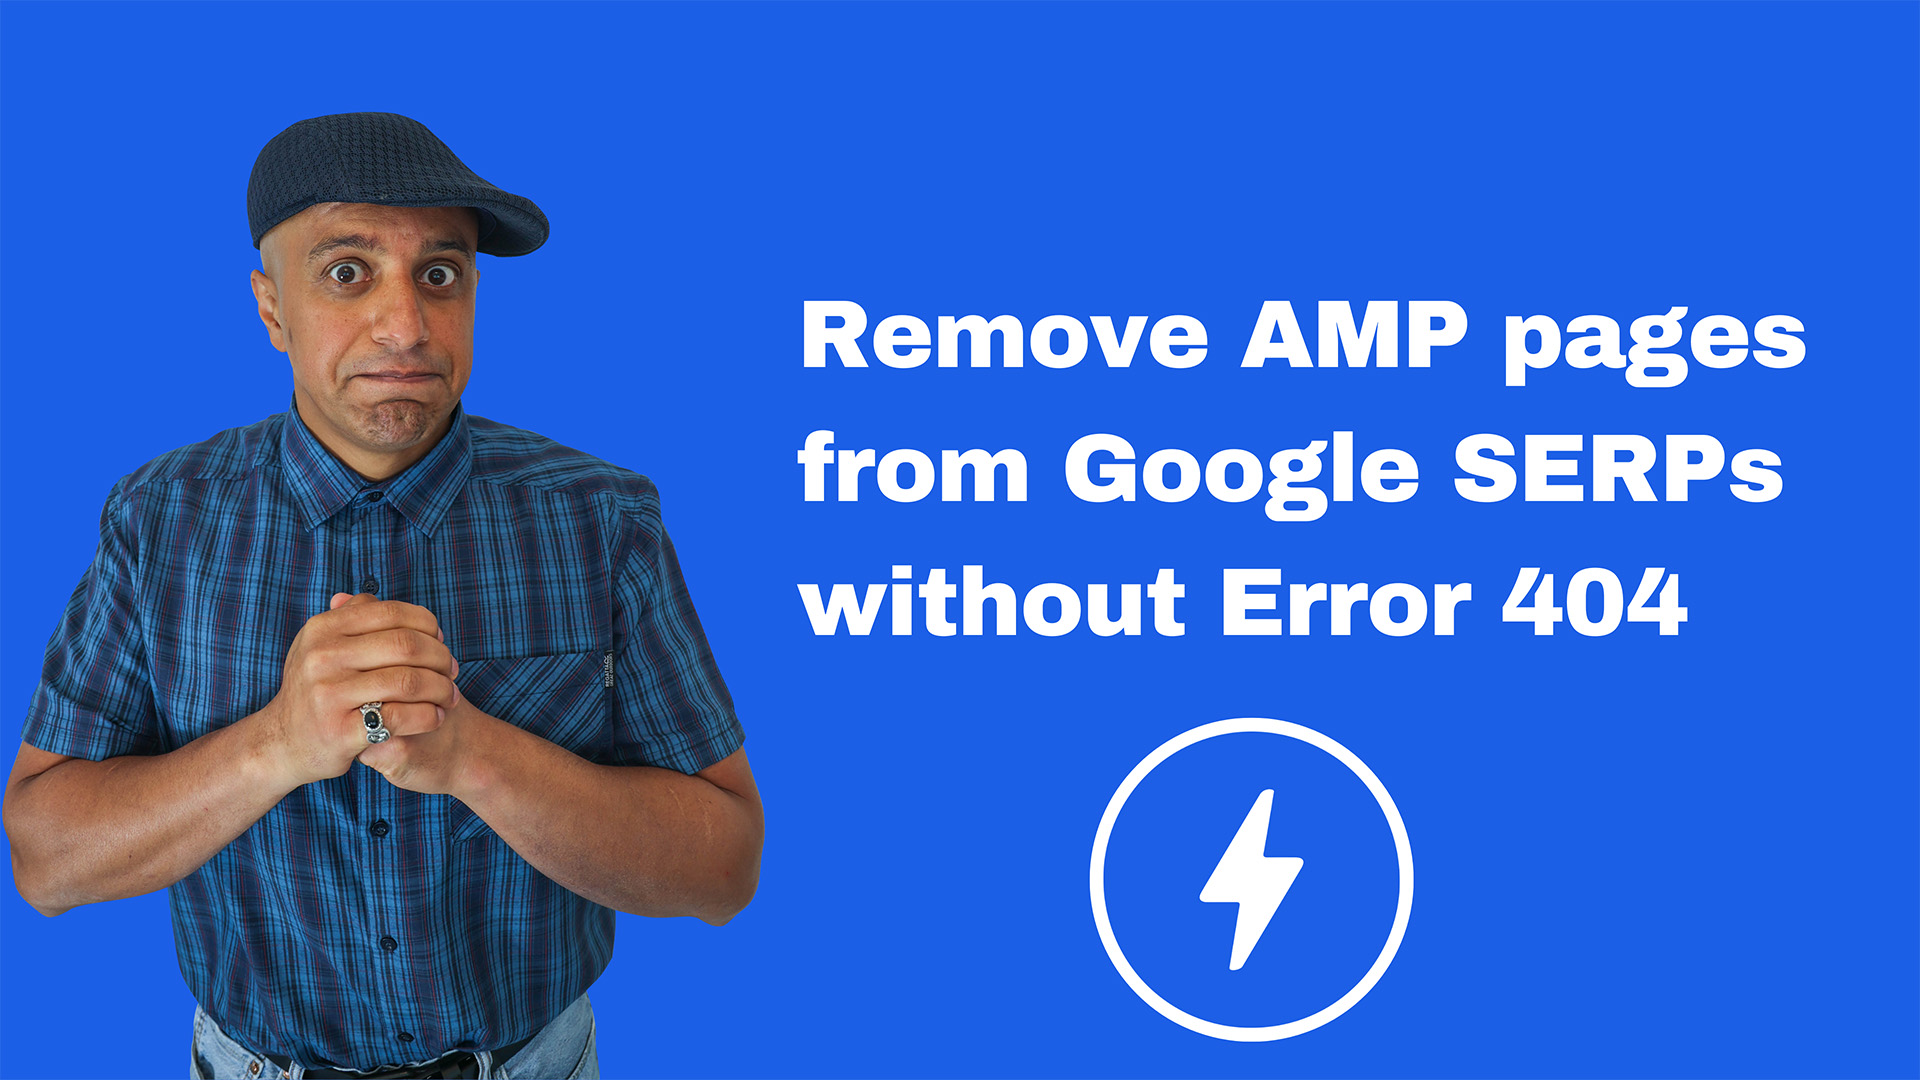 Remove AMP pages from Google SERPs without Error 404